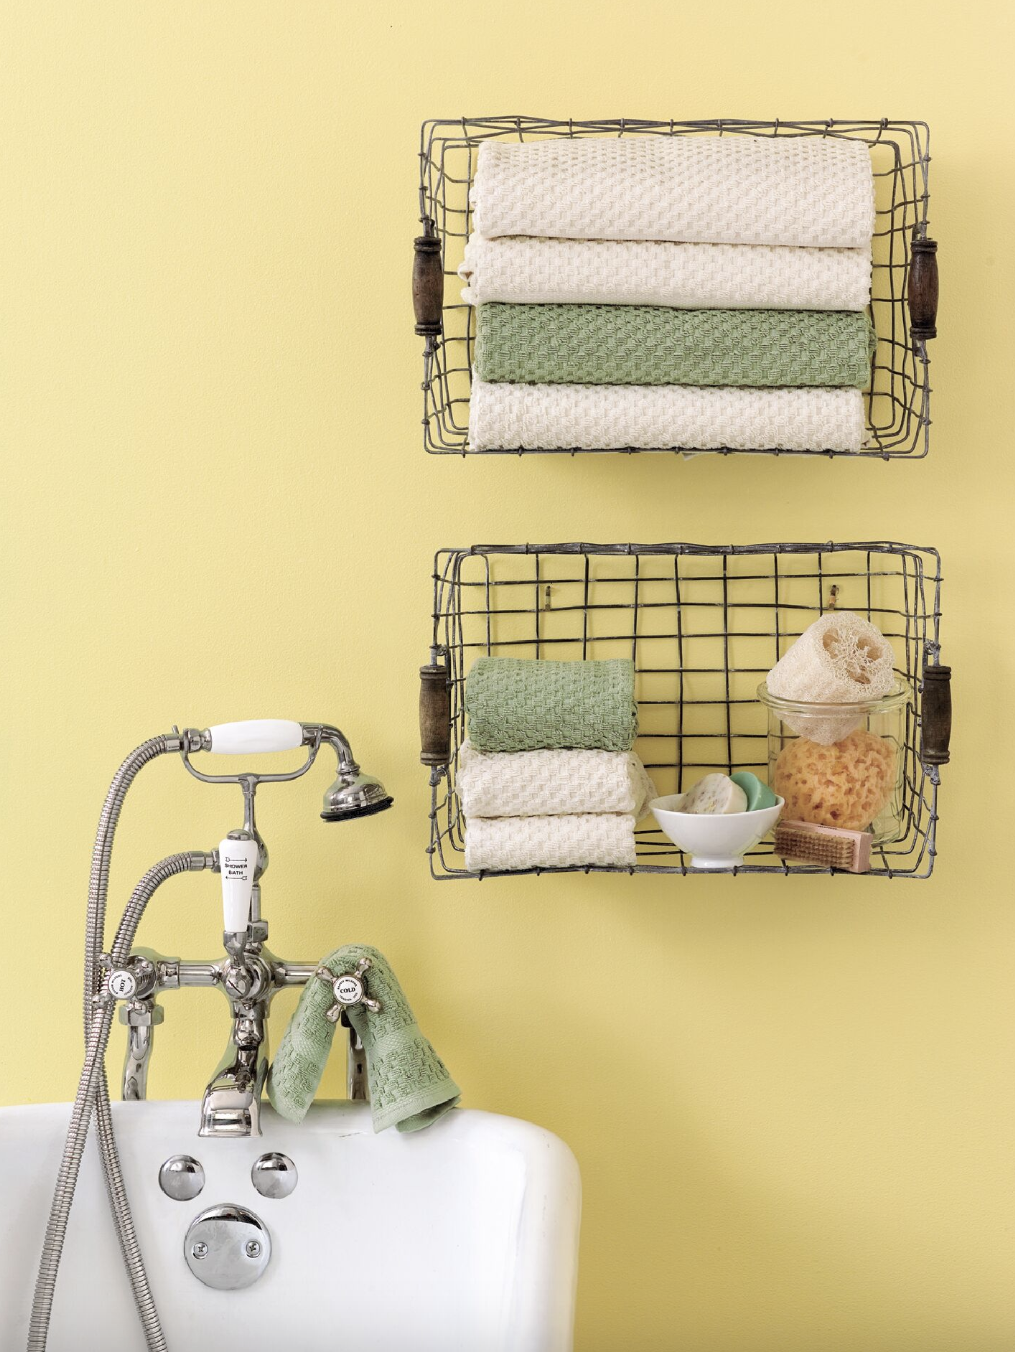 How to Find the Best Budget-Friendly Small Bathroom Storage